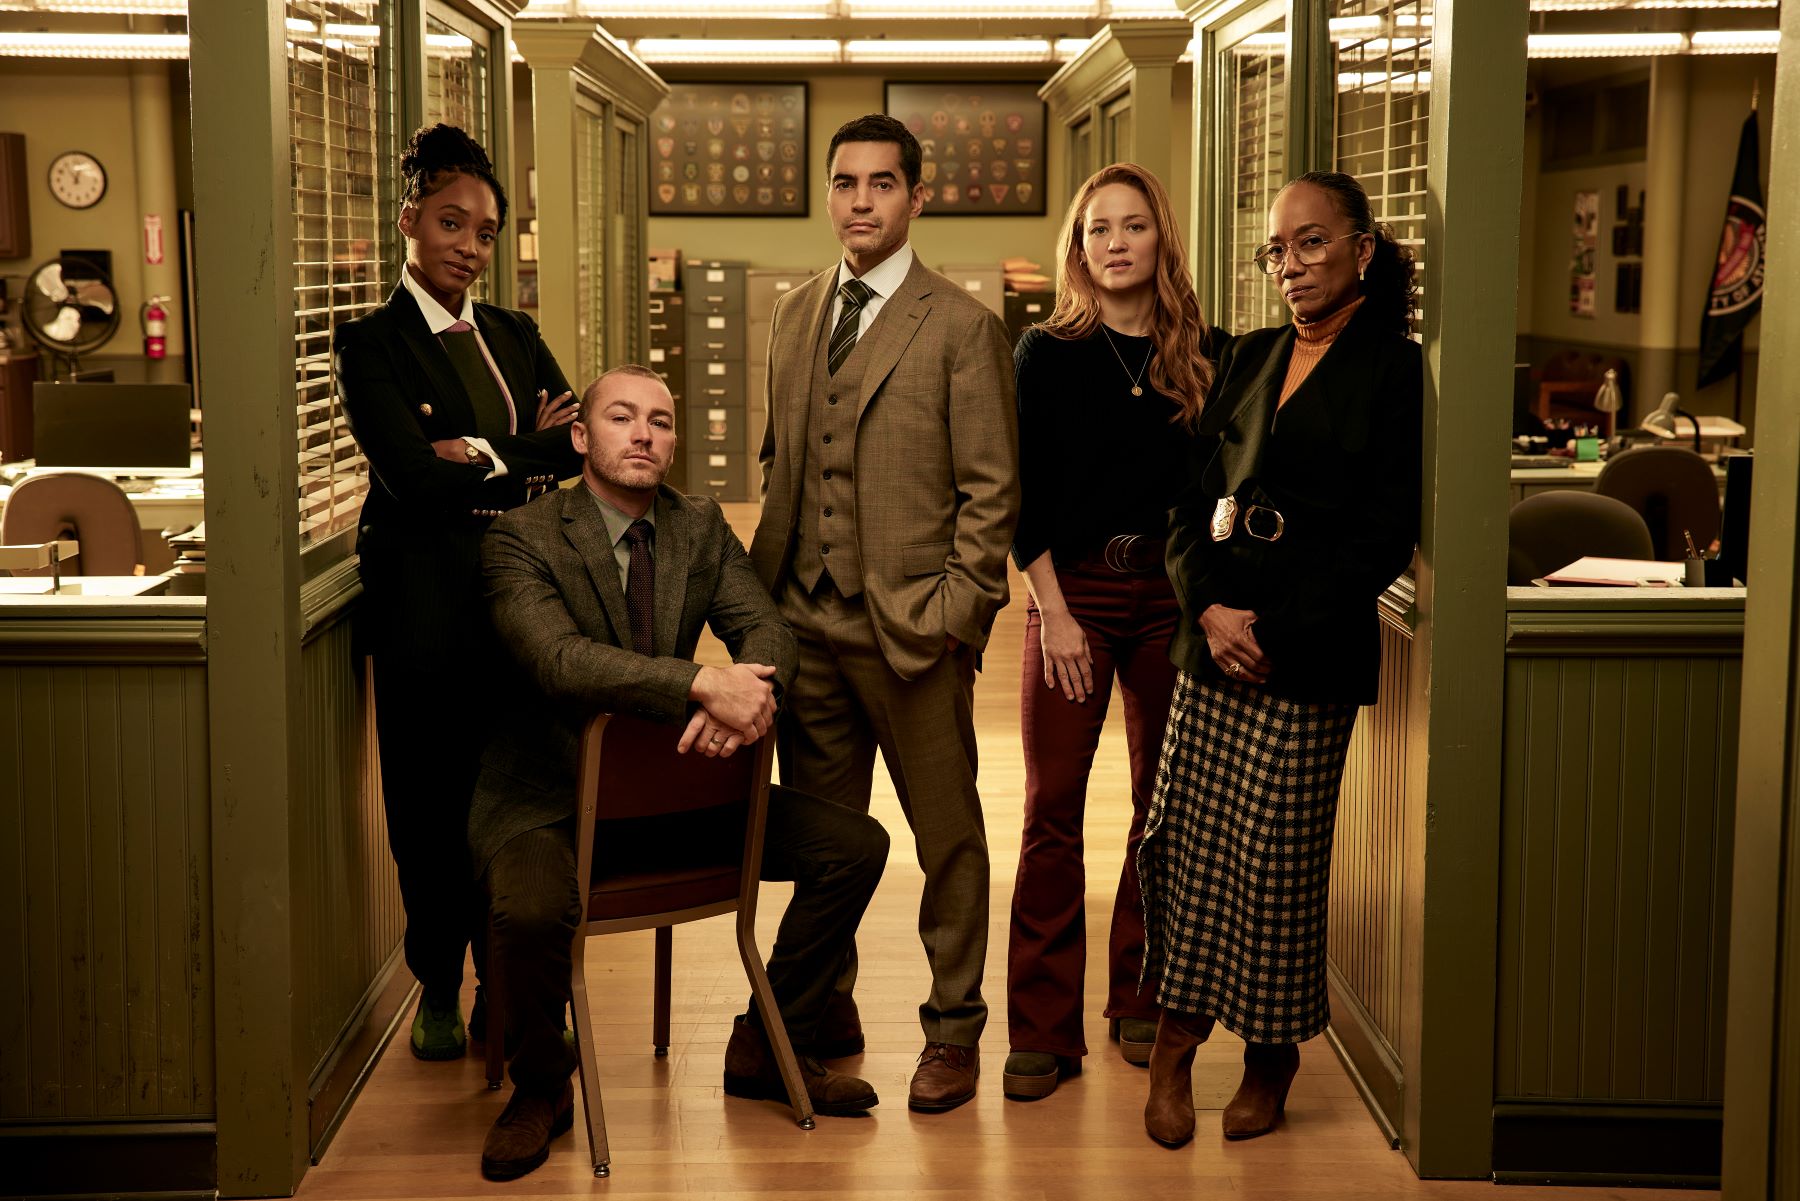 Iantha Richardson as Faith Mitchell, Jake McLaughlin as Michael Ormewood, Ramón Rodrìguez as Will Trent, Erika Christensen as Angie Polaski, and Sonja Sohn as Amanda Wagner pose for promotional pictures for 'Will Trent' on ABC. Faith wears a black suit. Michael wears a dark brown suit. Will wears a brown three-piece suit. Angie wears a black sweater and red pants. Amanda wears a black suit and black and white plaid skirt.